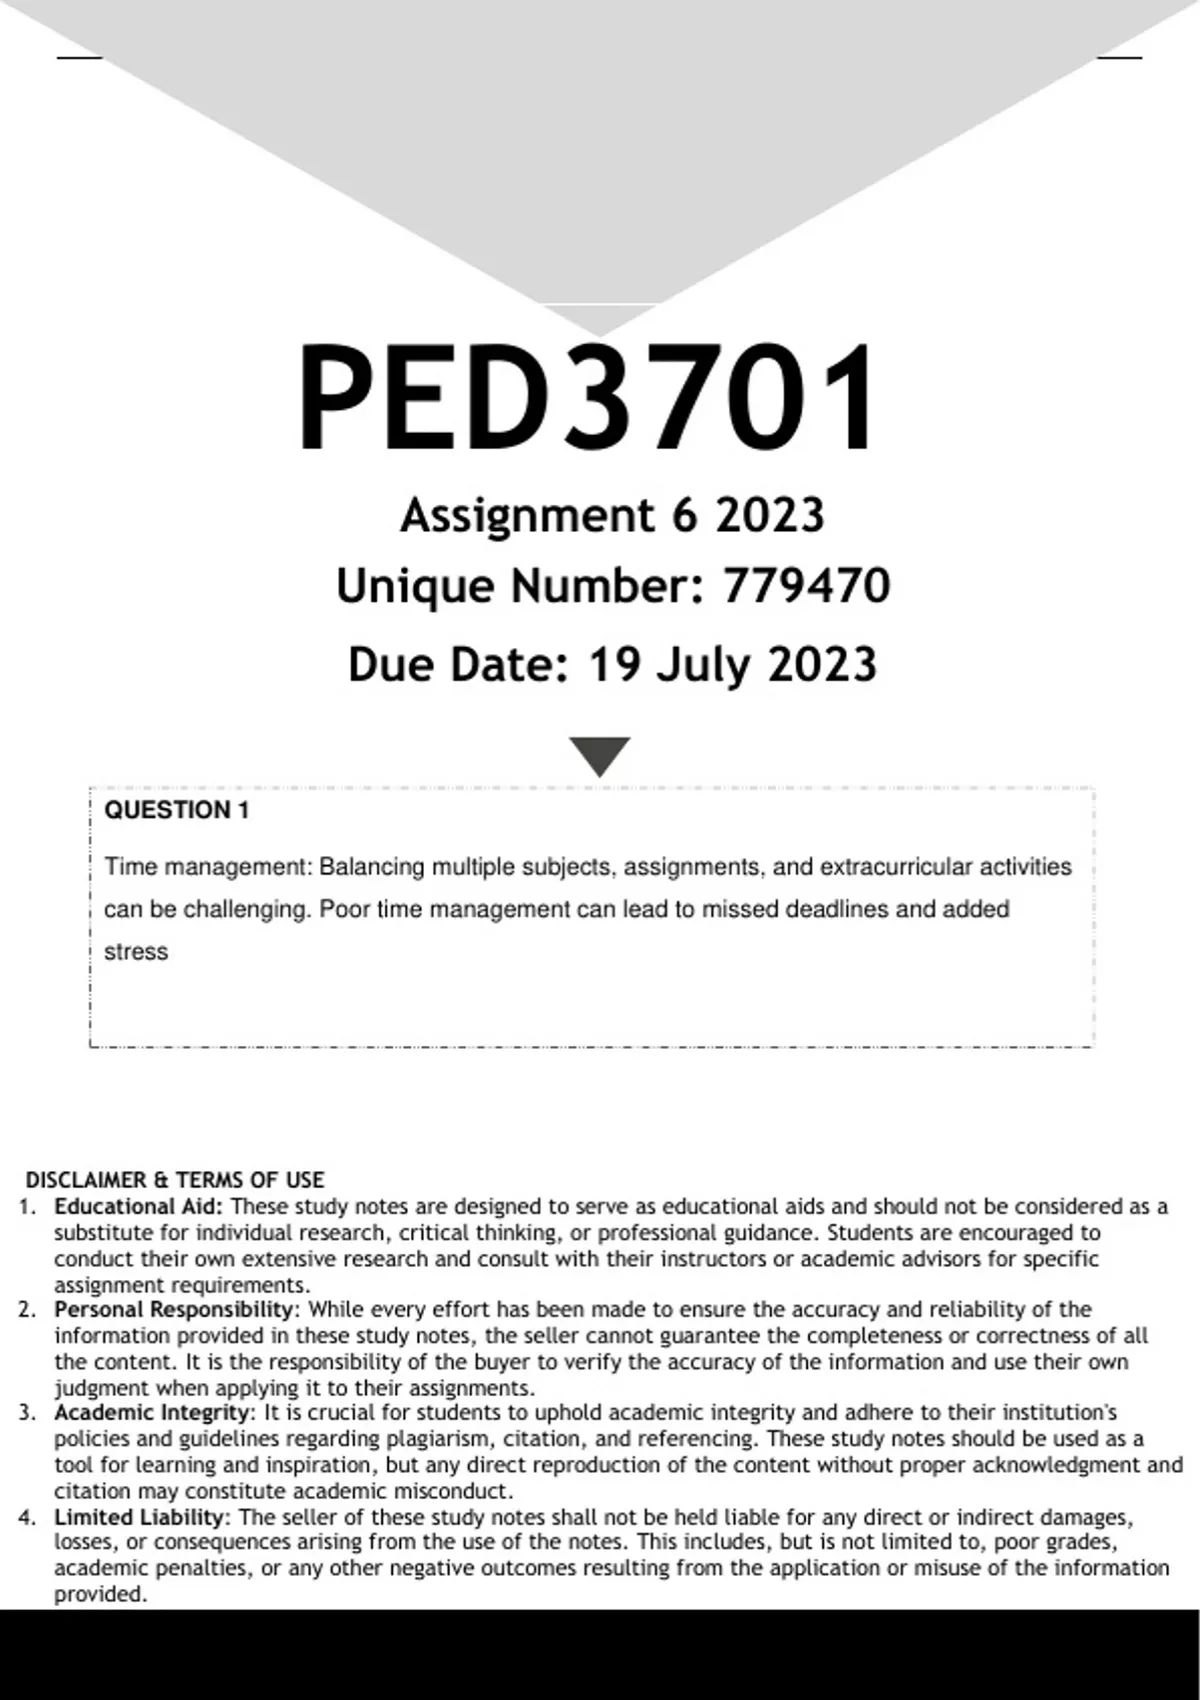 ped3701 assignment 6 answers